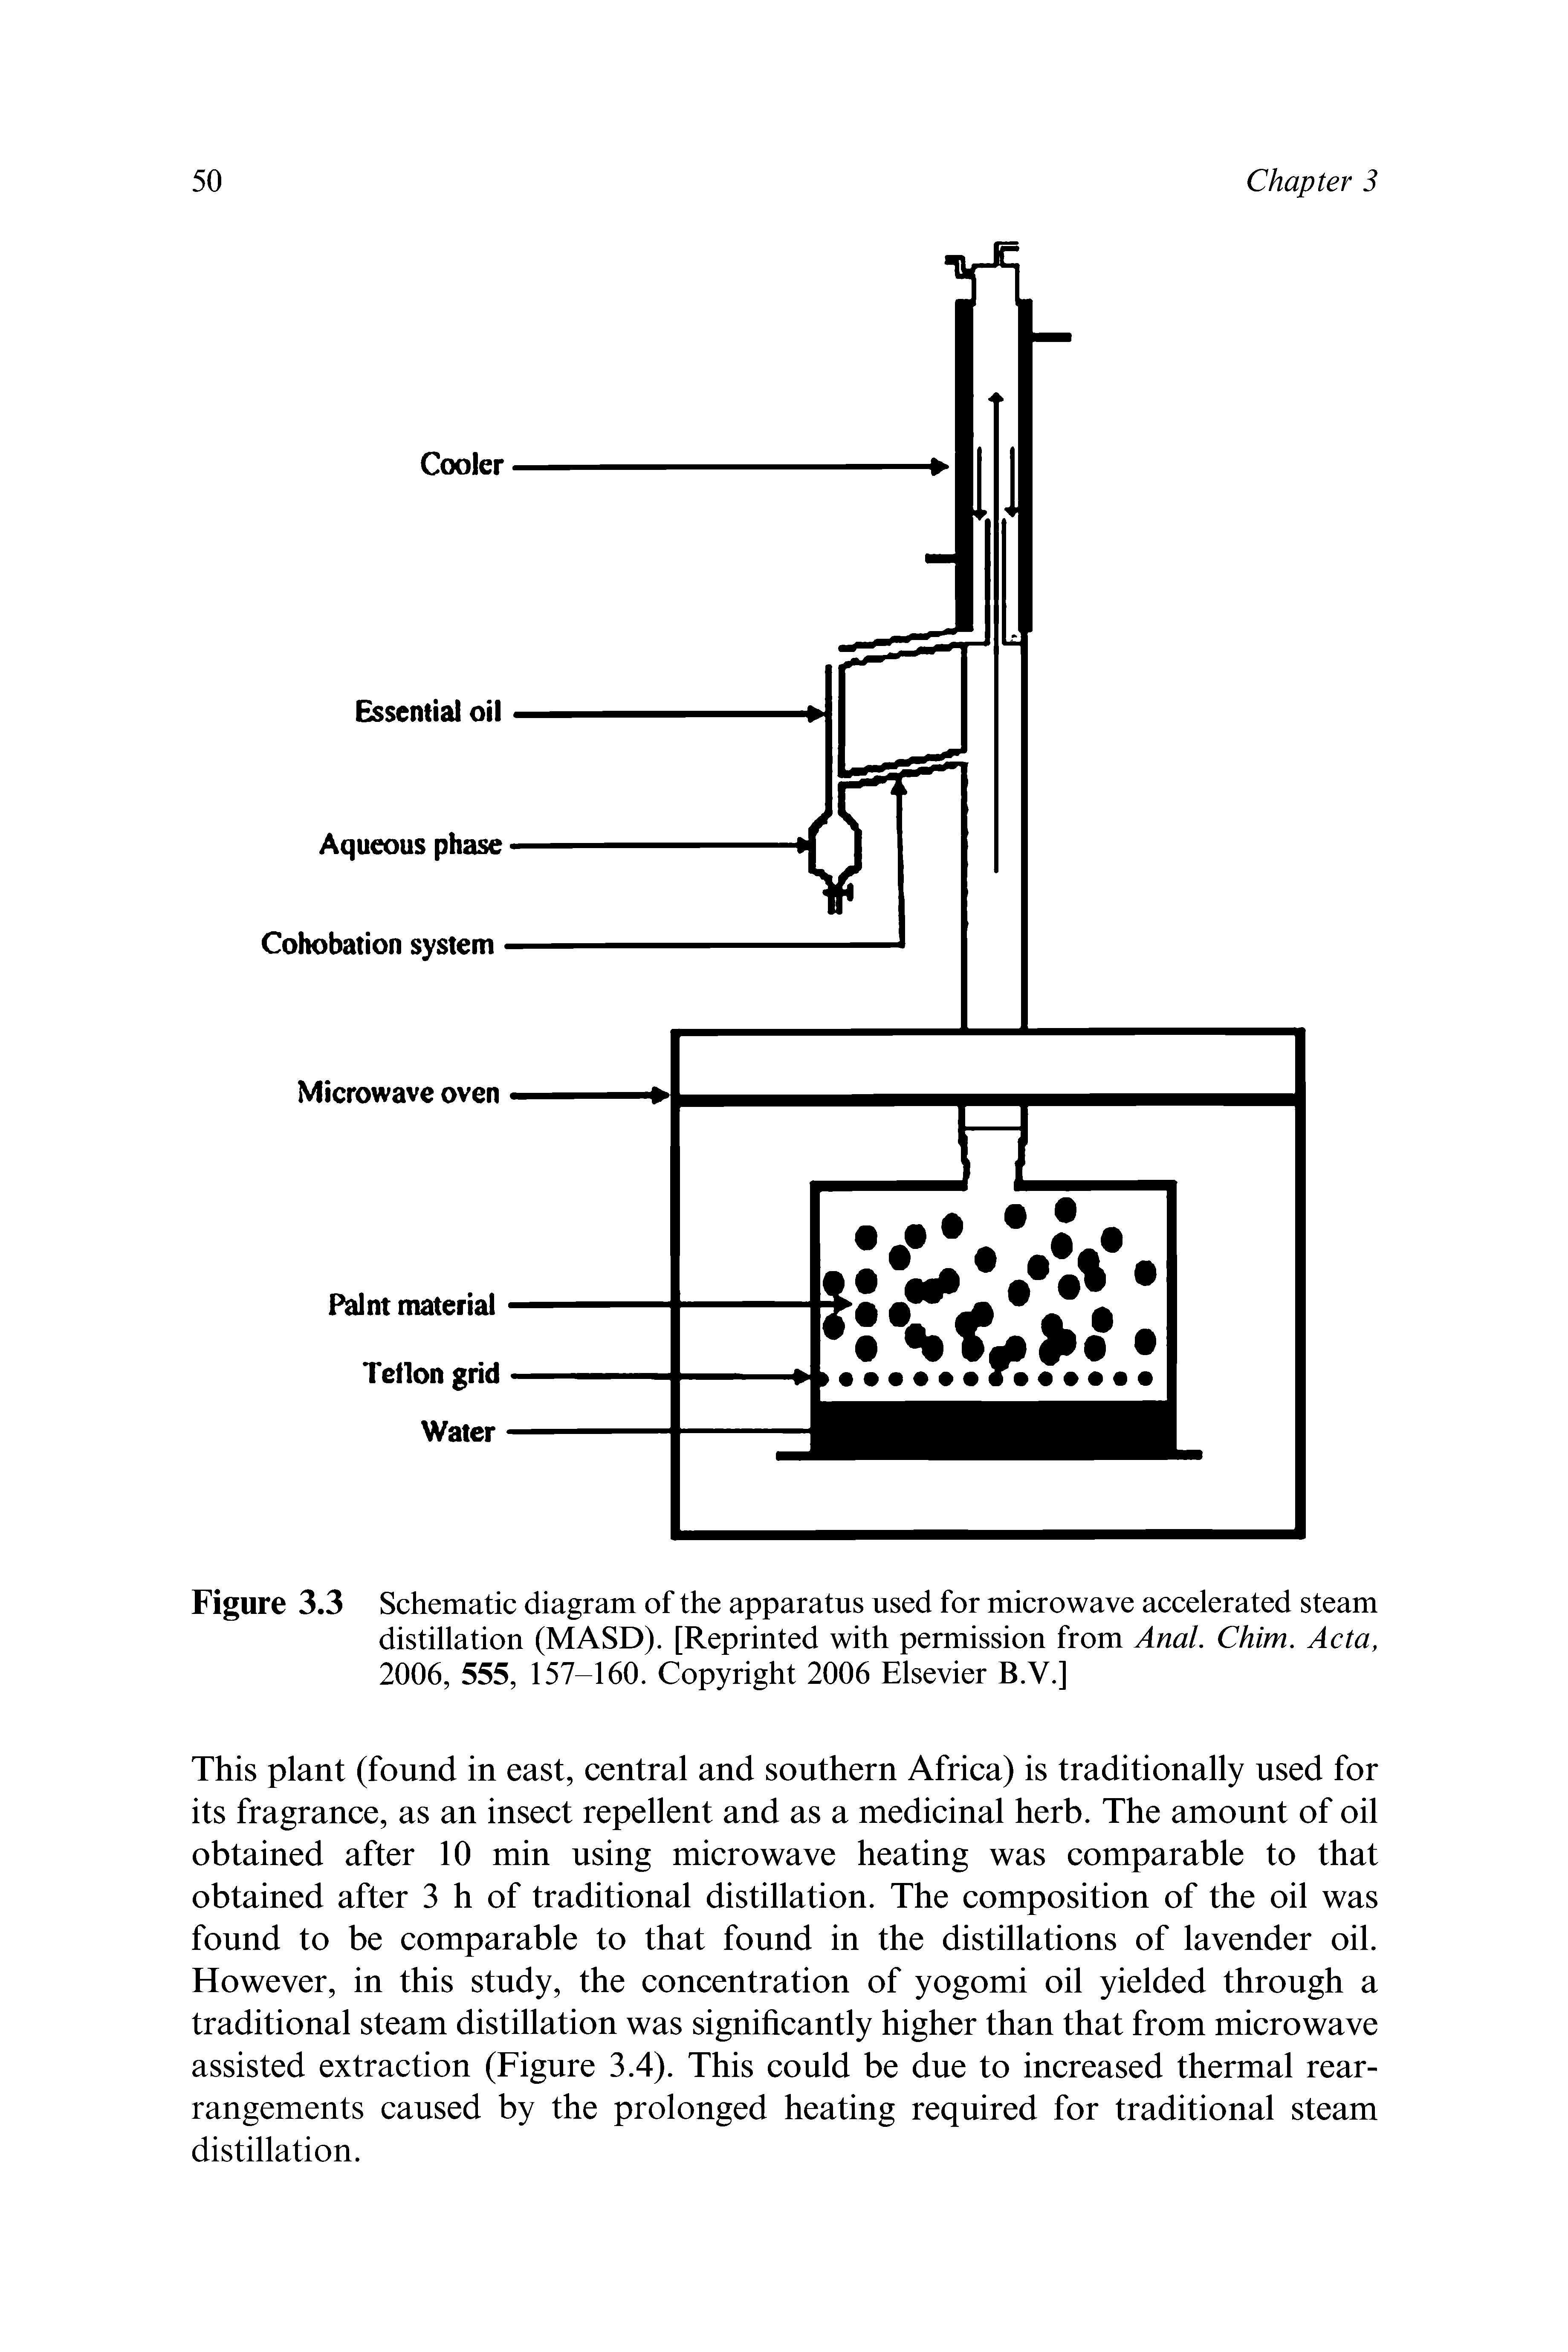 Schematic diagram of the apparatus used for microwave accelerated steam distillation (MASD). [Reprinted with permission from Anal. Chim. Acta, 2006, 555, 157-160. Copyright 2006 Elsevier B.V.]...